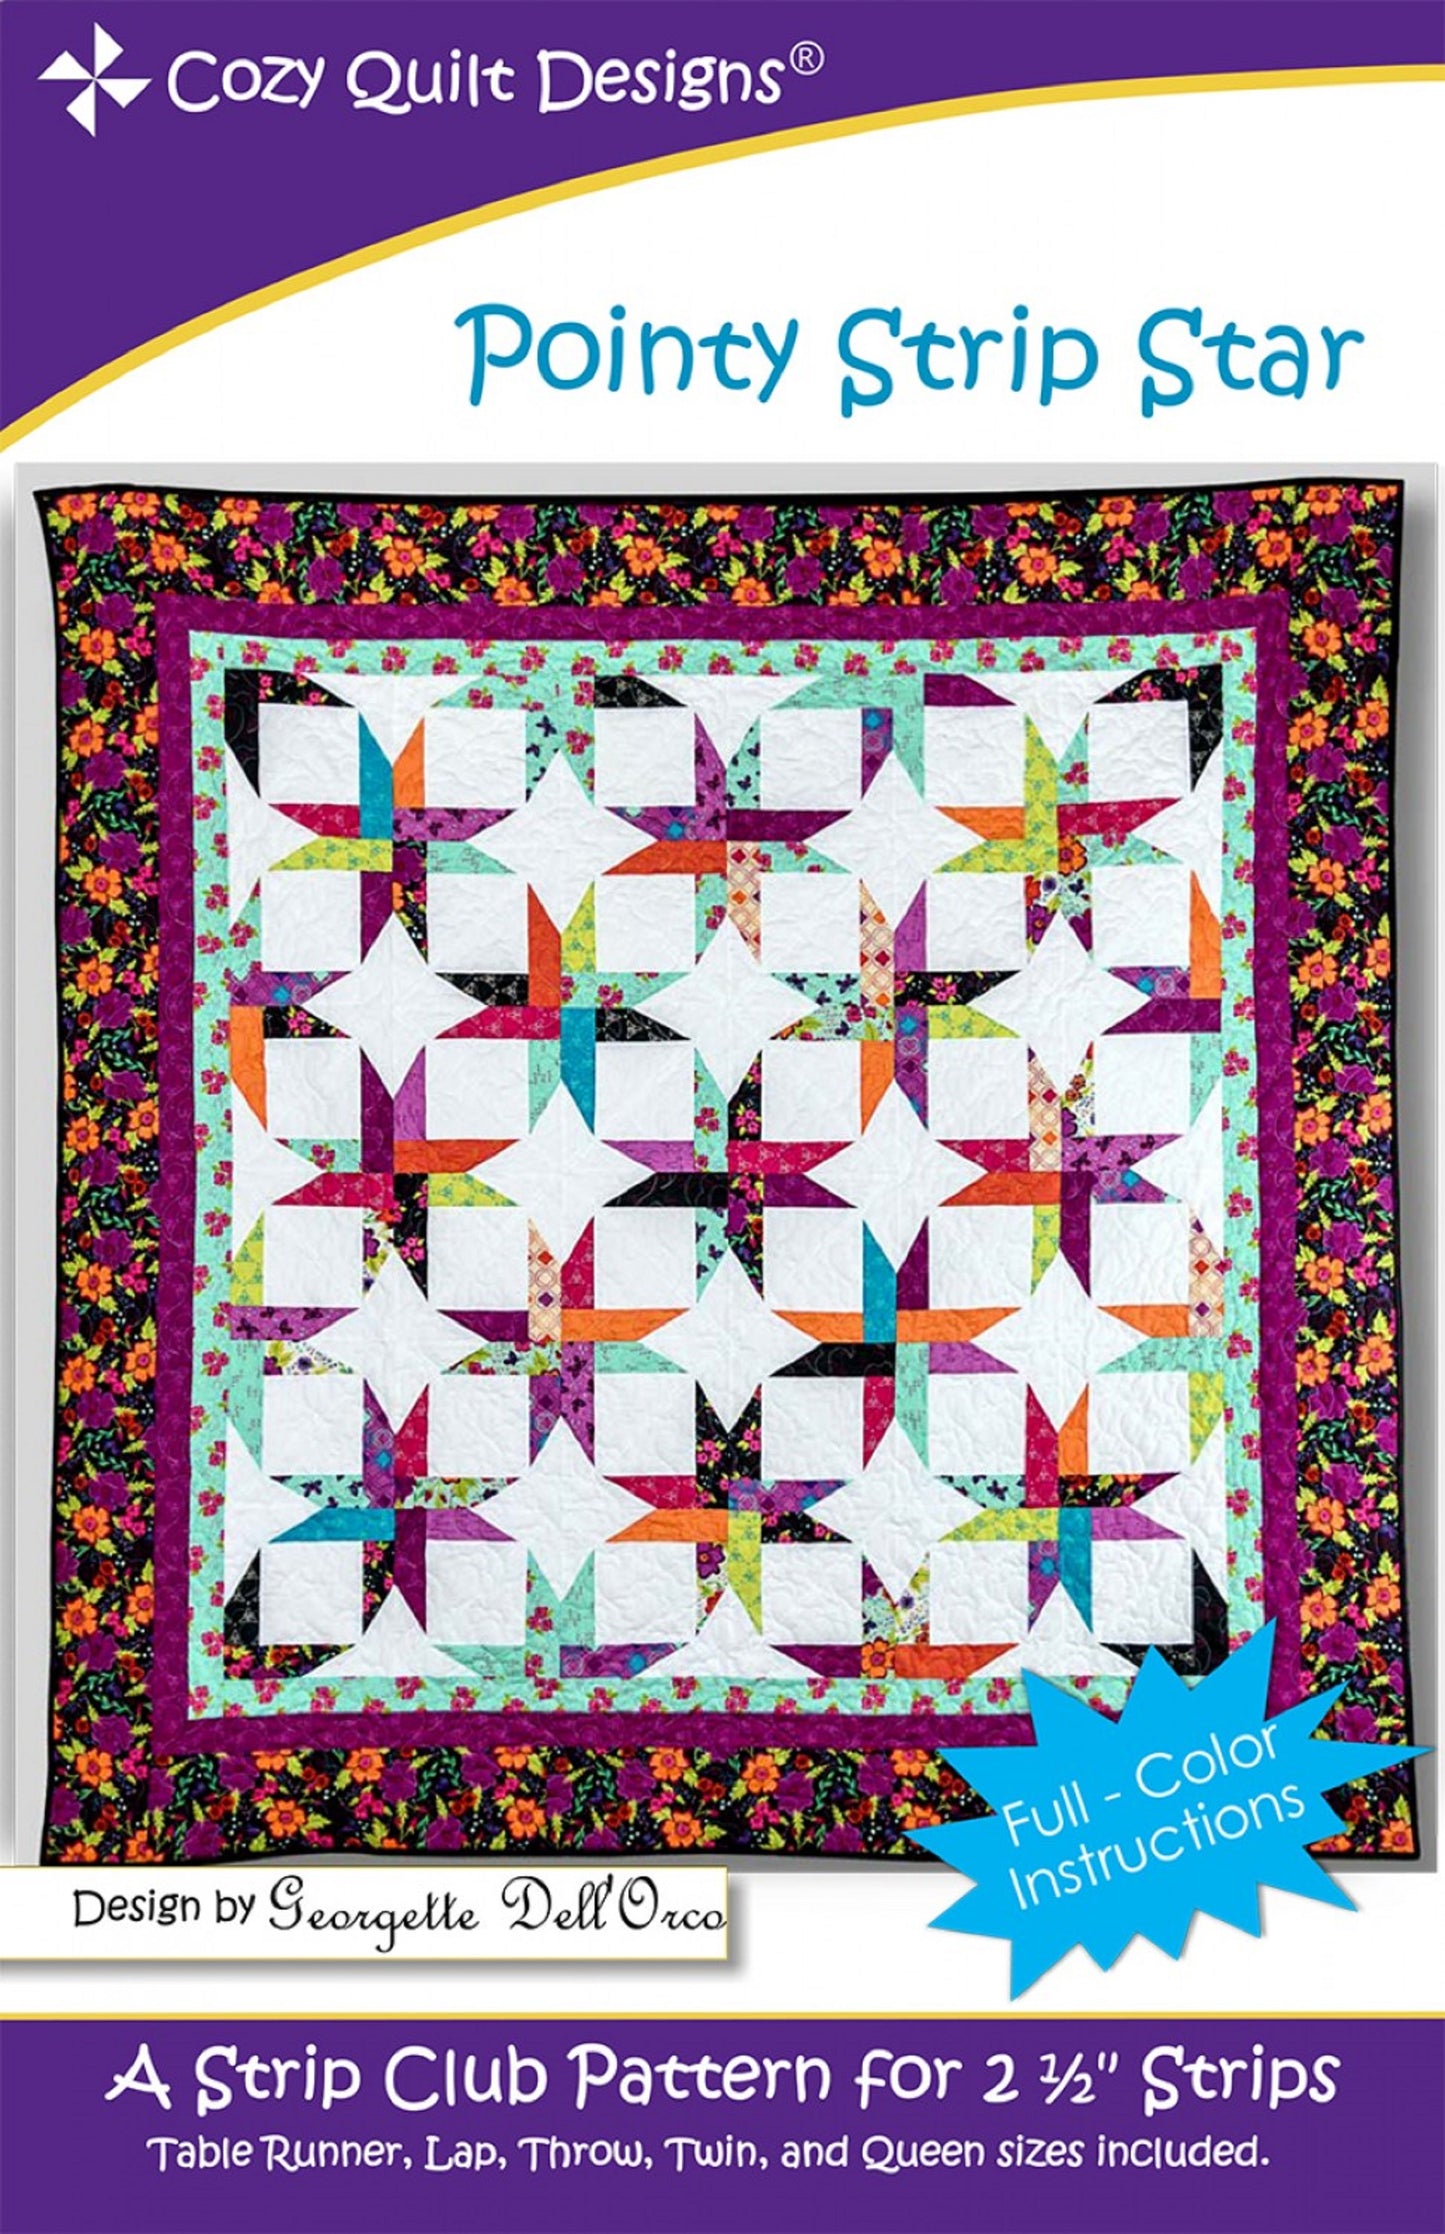 Pointy Strip Star Quilt Pattern by Cozy Quilt Designs